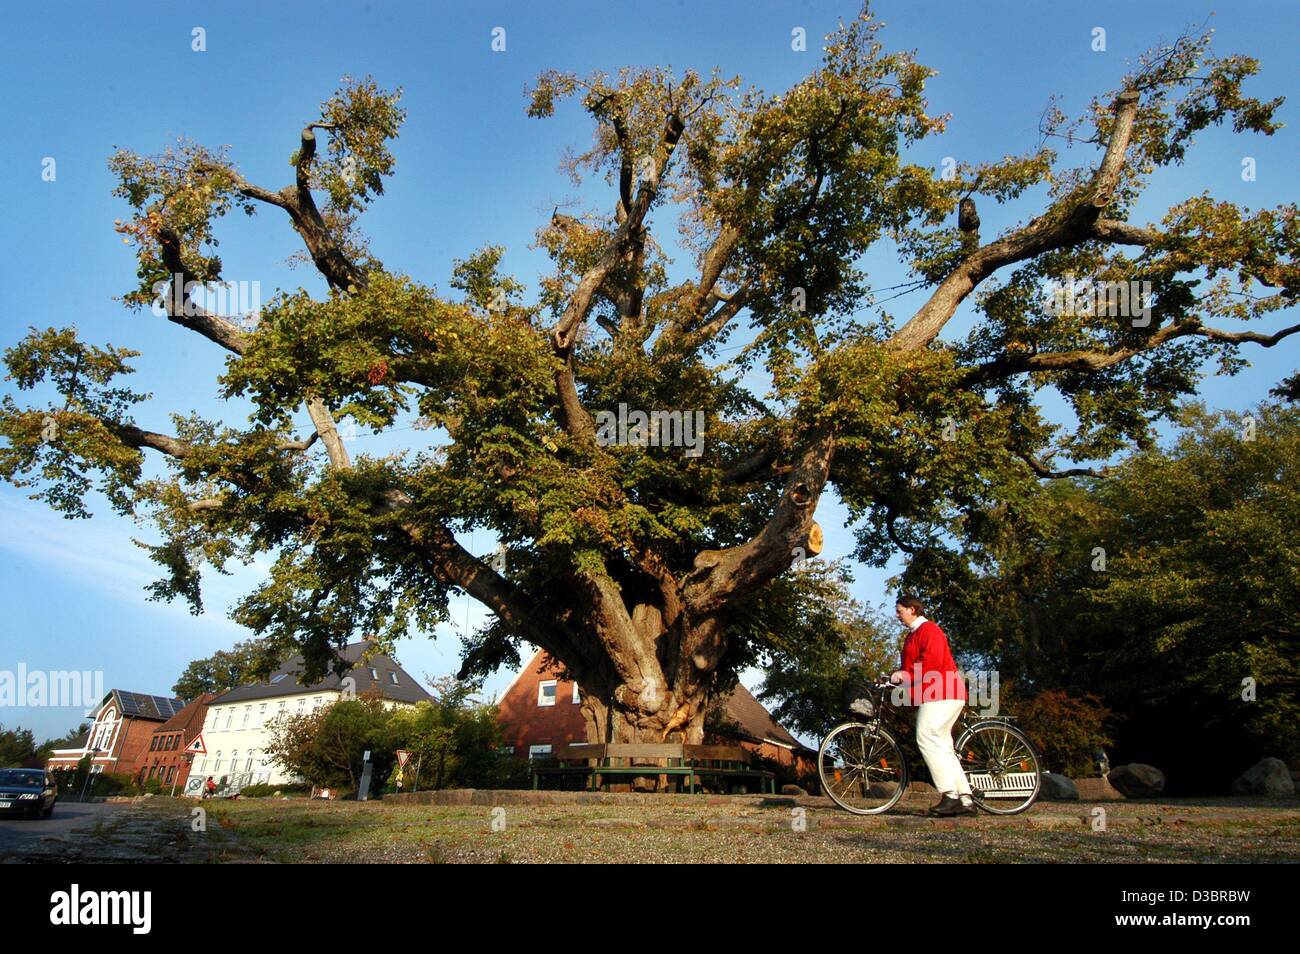 (dpa) - A woman pushes a bike past the age-old lime tree, which has been standing for about 650 years in the centre of the village of Bordesholm, northern Germany, 1 October 2003. The tree is the landmark sign of the village. Stock Photo